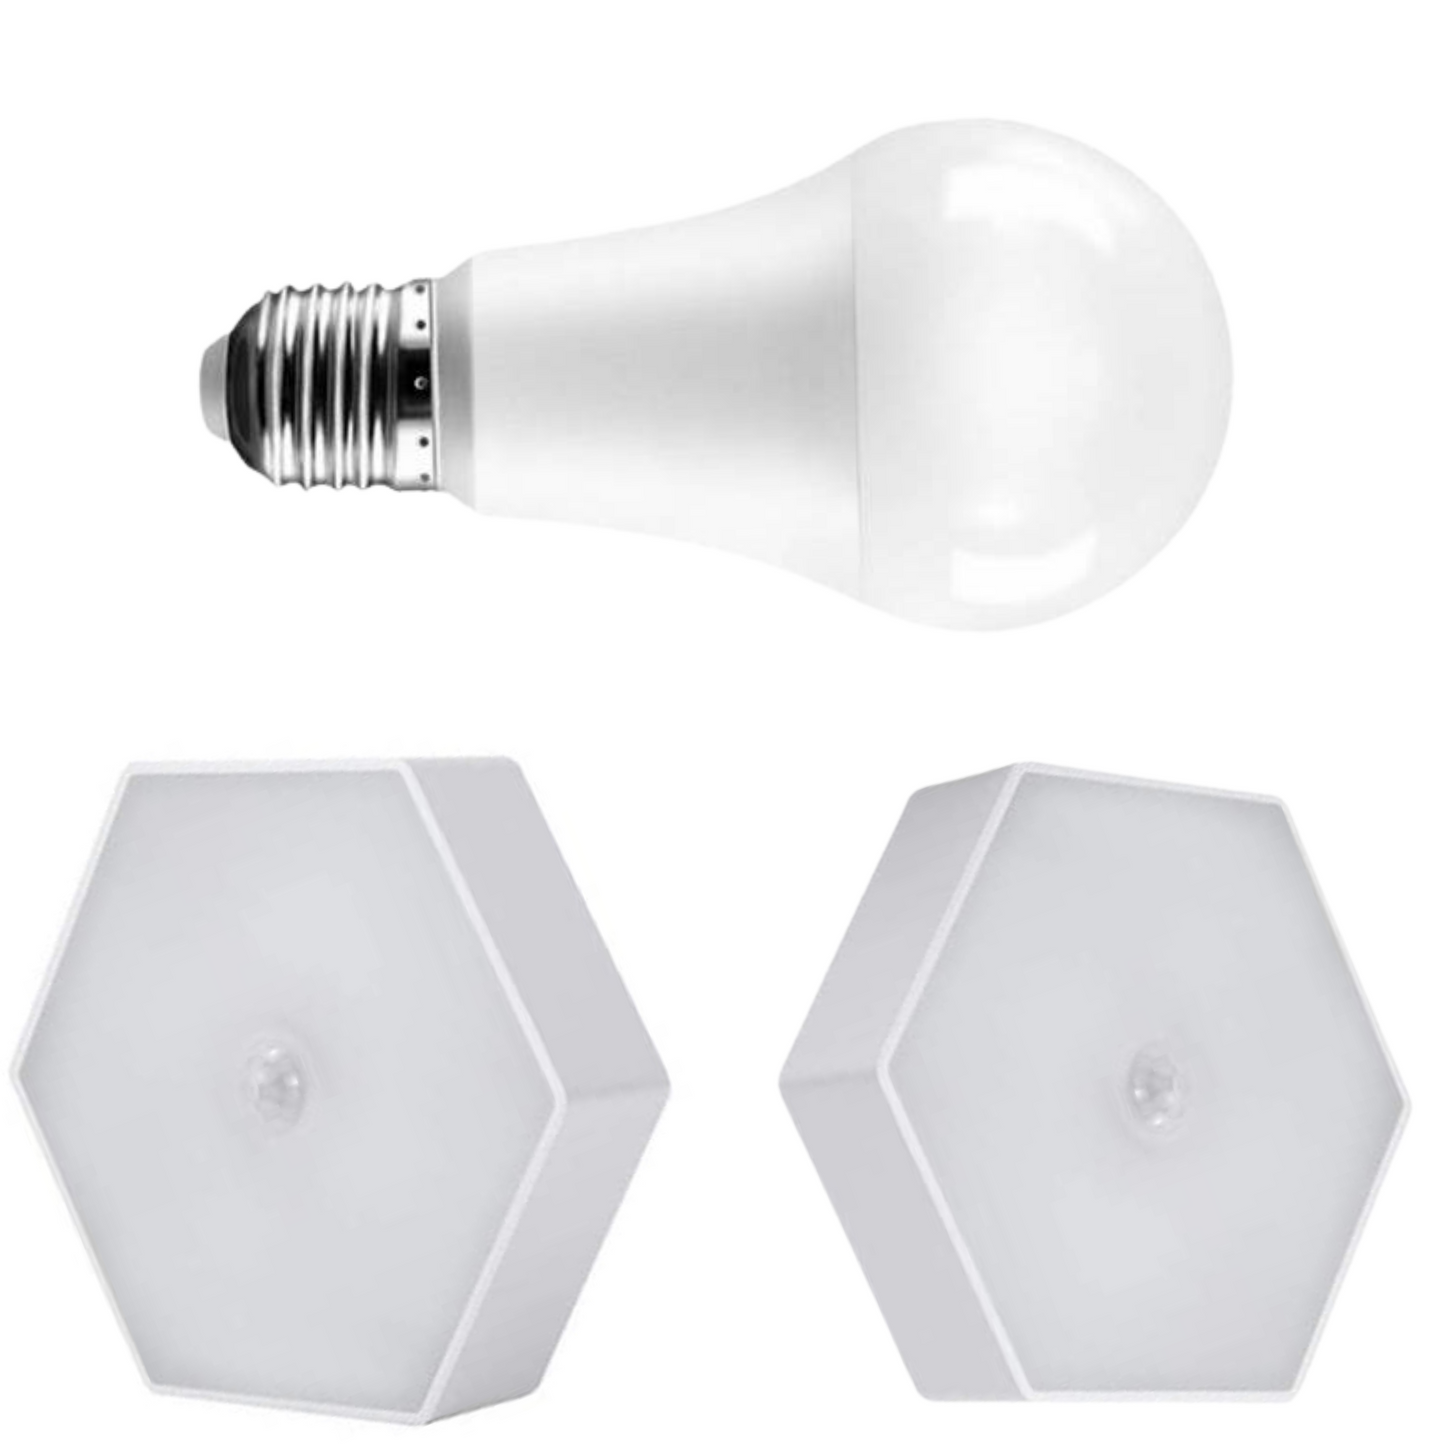 2 Motion Lights and Night Switch Bulb